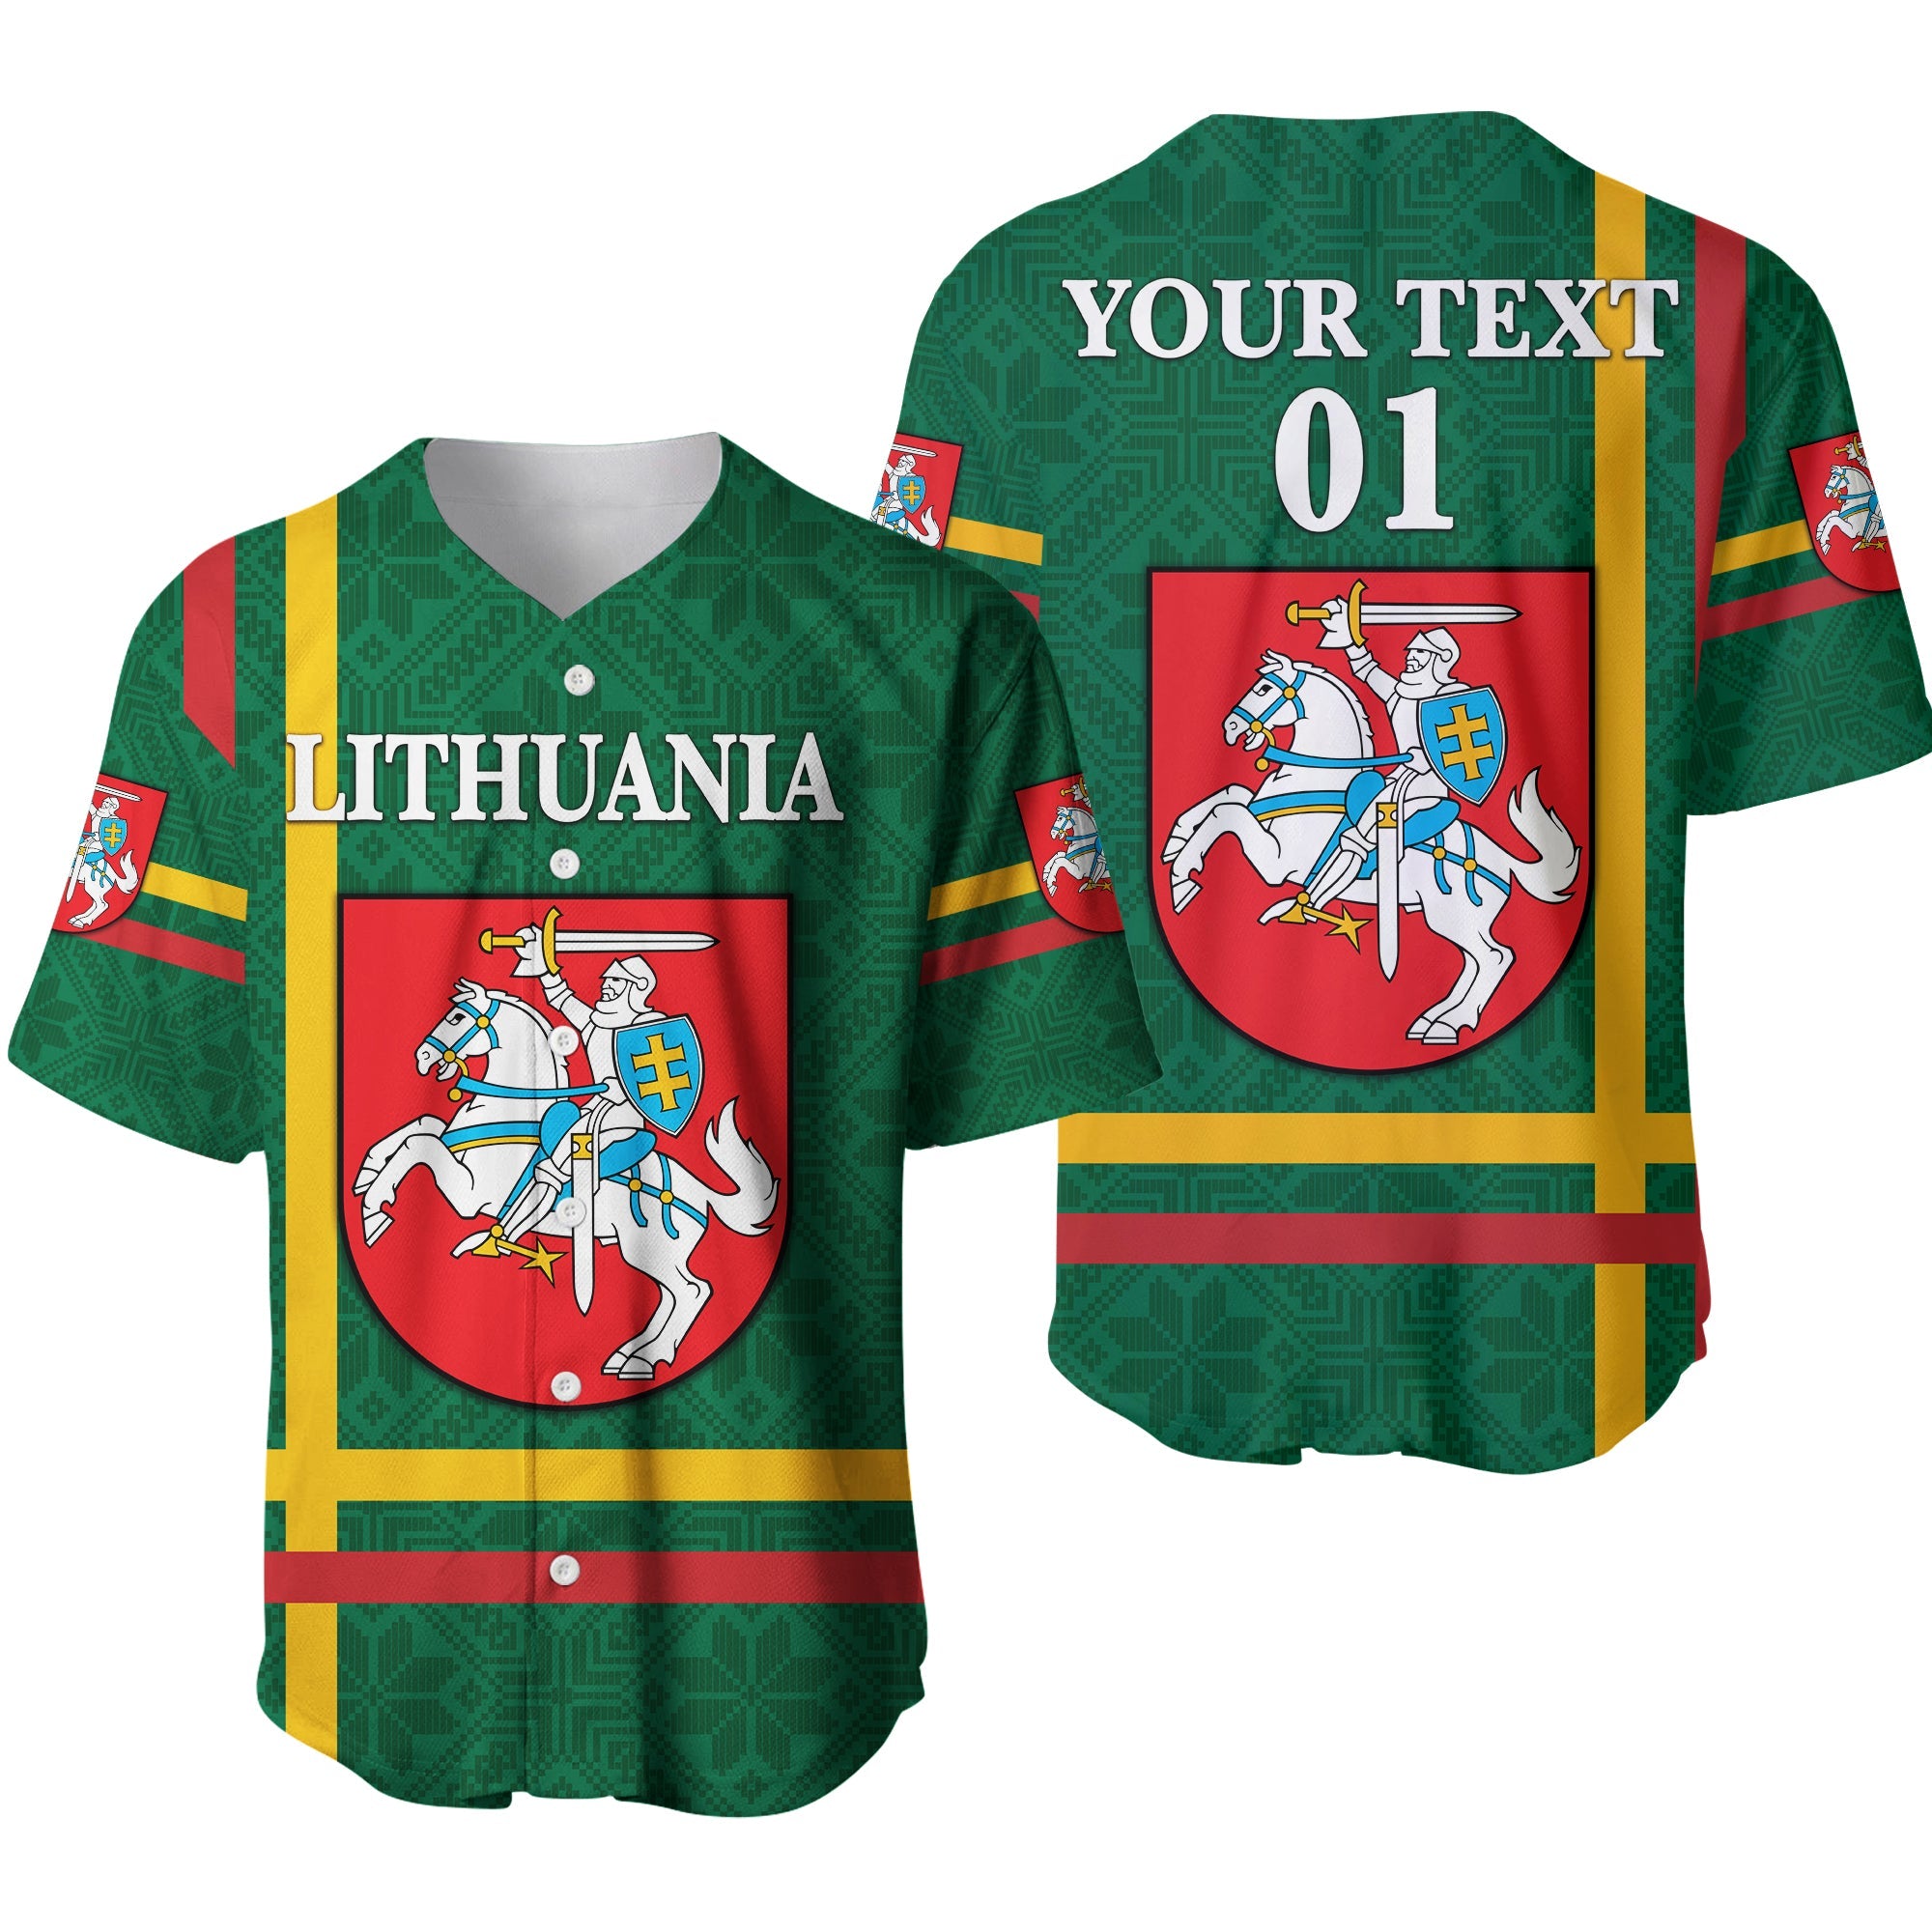 custom-personalised-lithuania-baseball-jersey-coat-of-arms-lietuva-flag-style-green